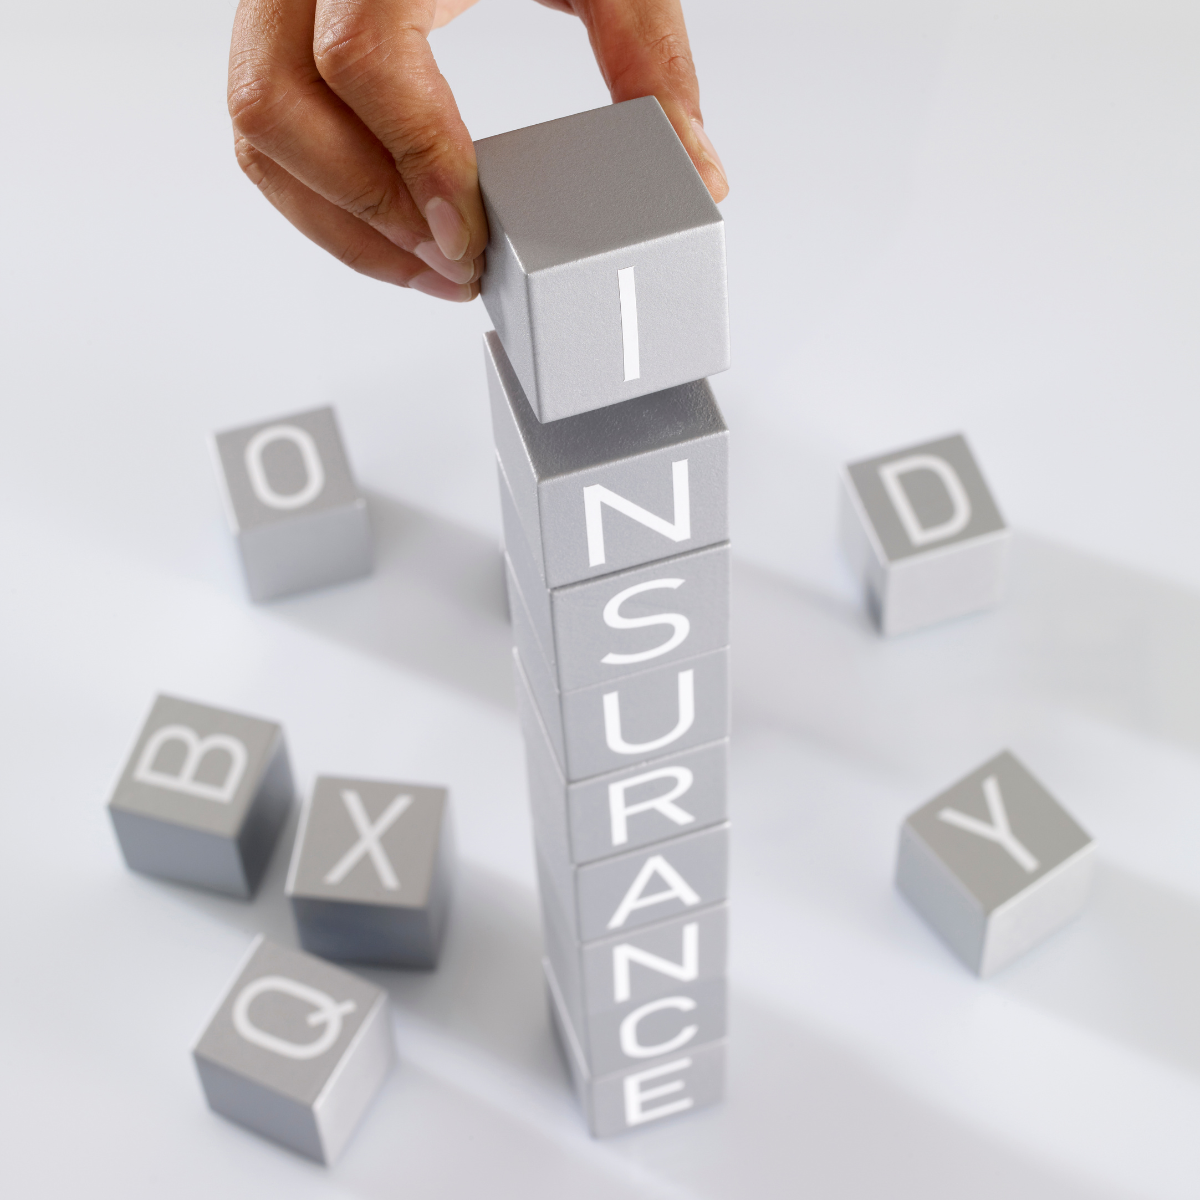 A person stacking blocks that spells out Insurance.